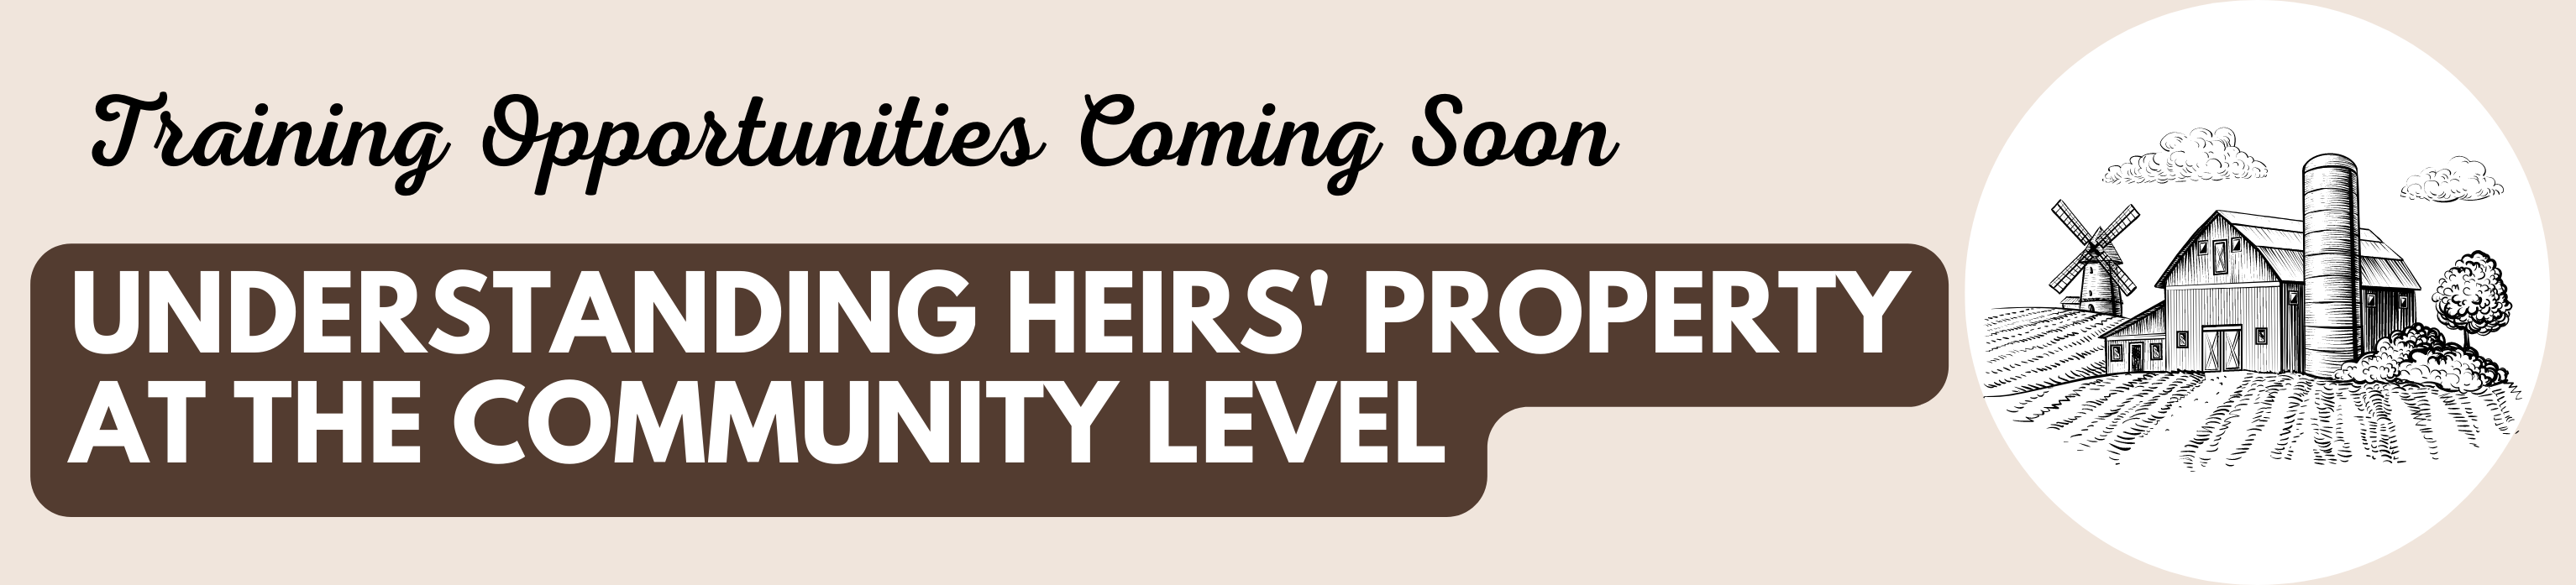 Understanding Heirs' Property at the Community Level Training Opportunity Banner